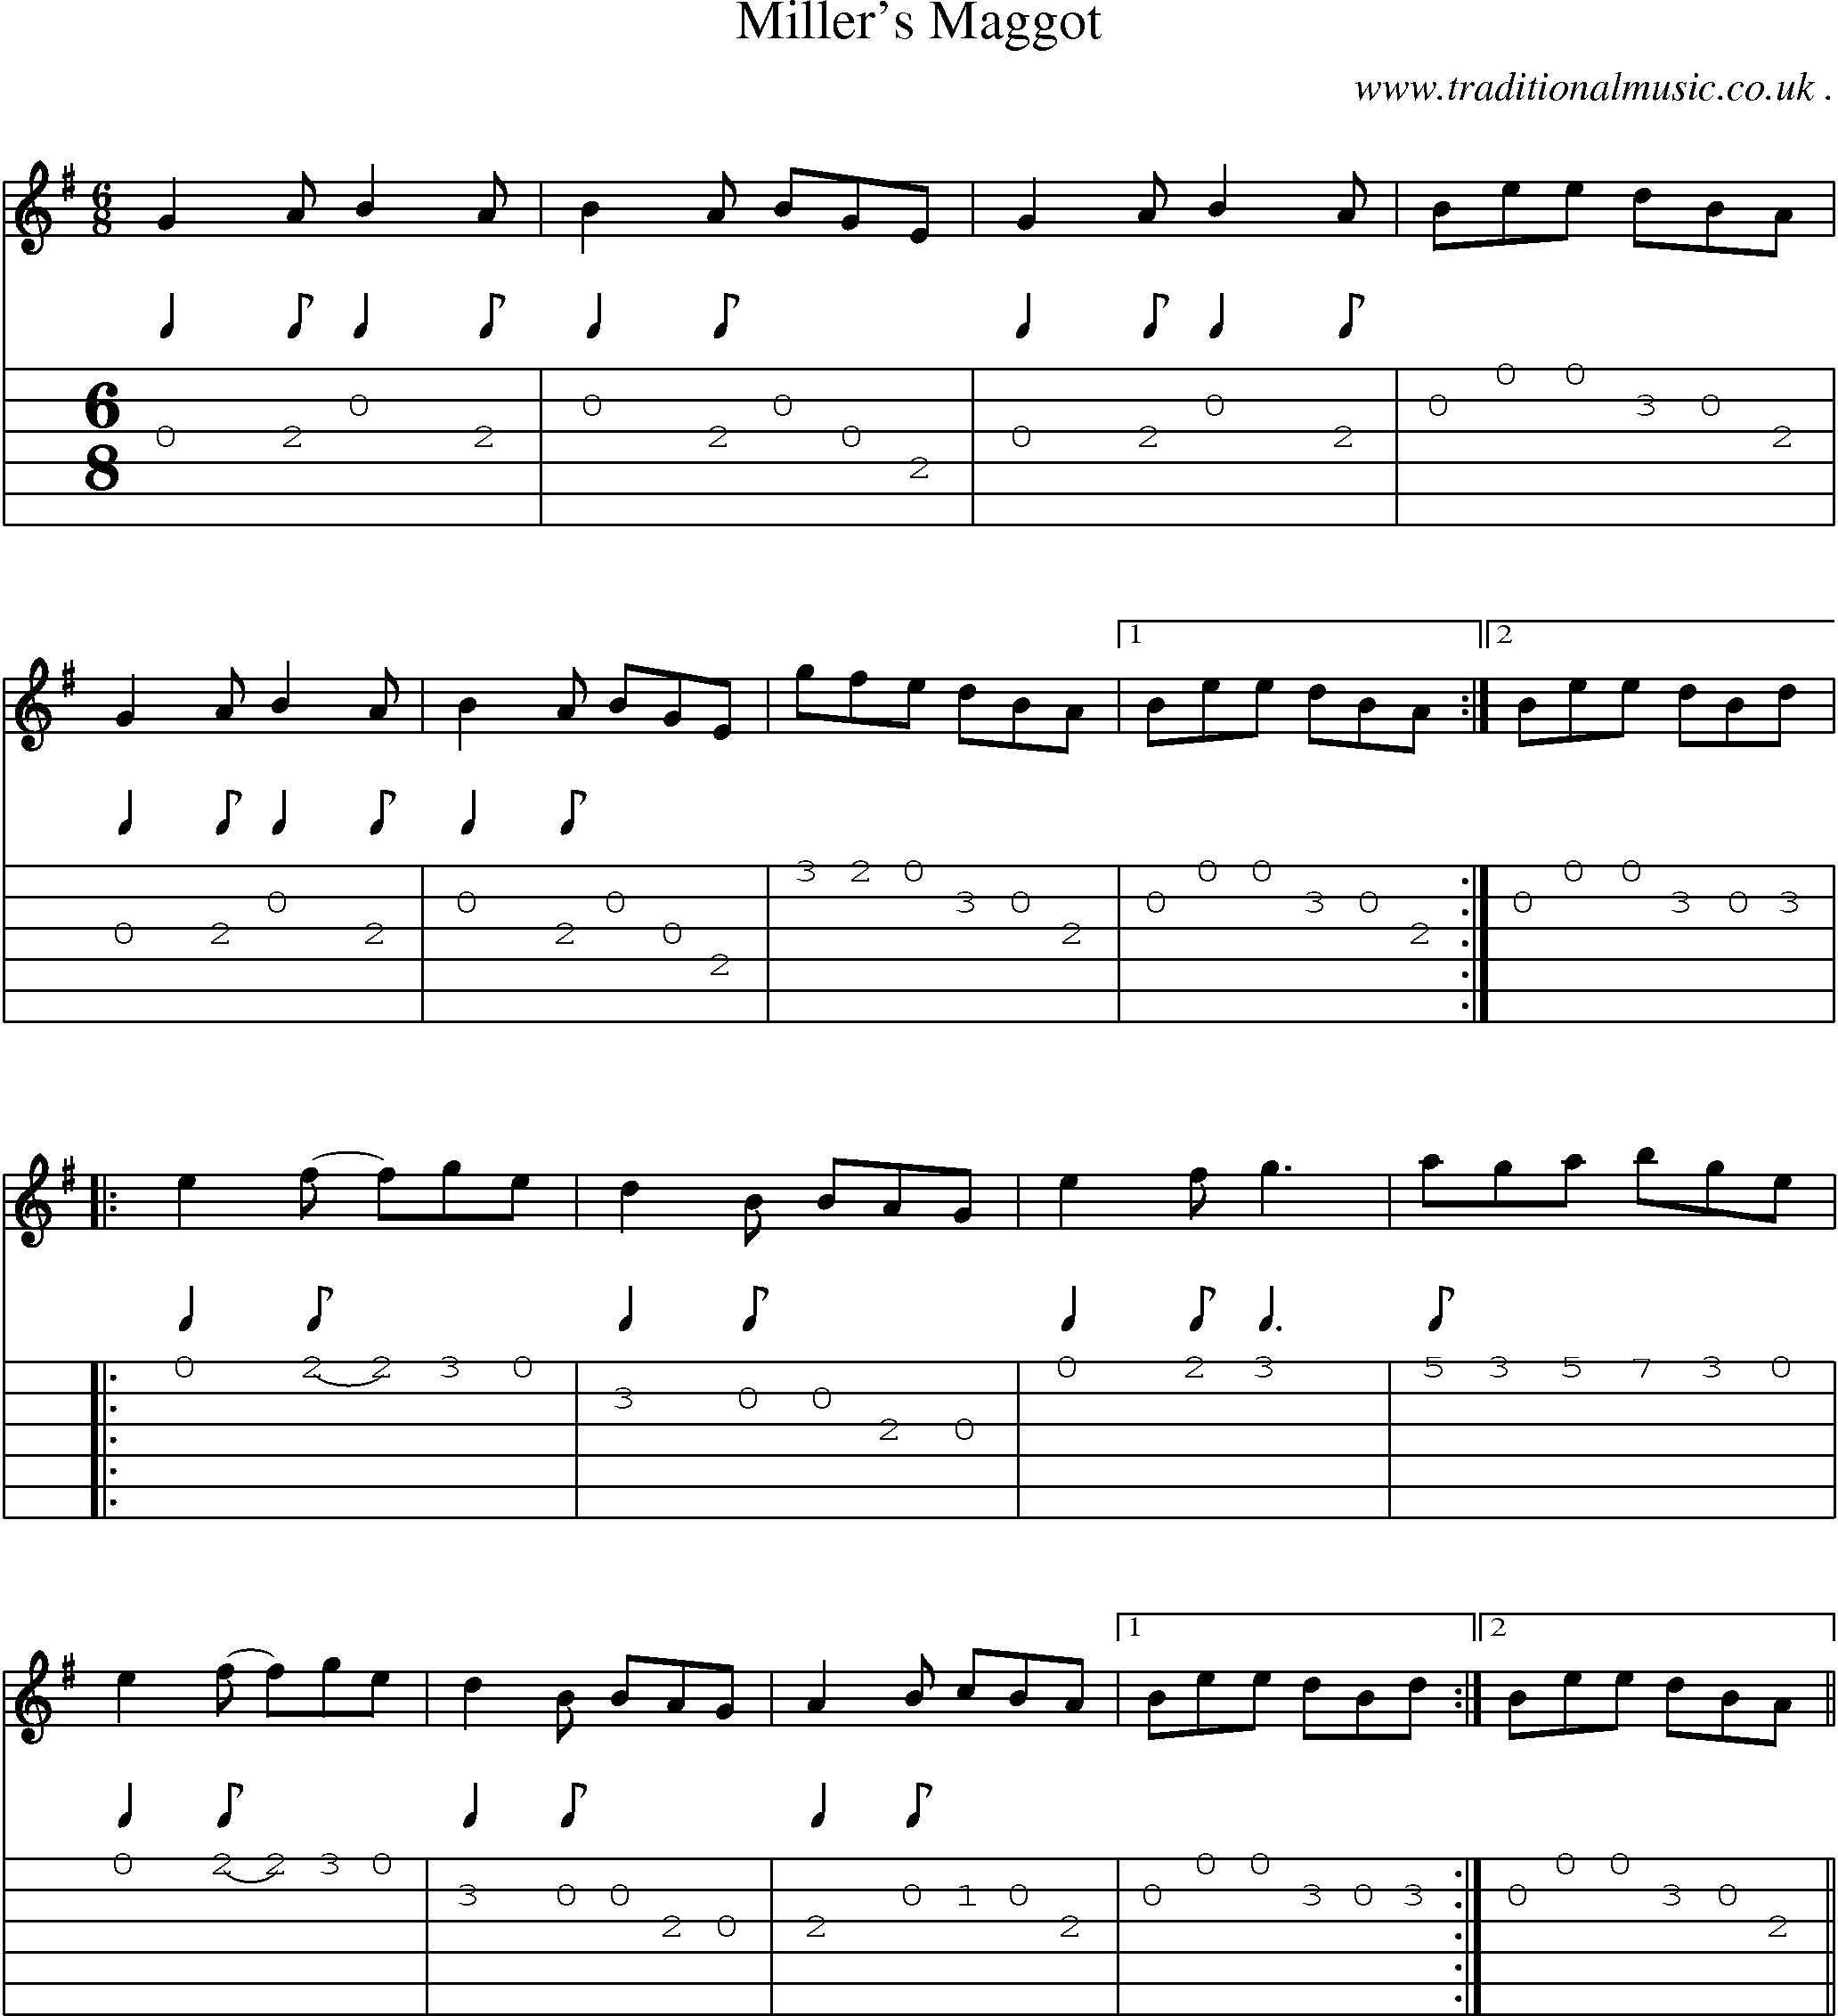 Sheet-Music and Guitar Tabs for Millers Maggot